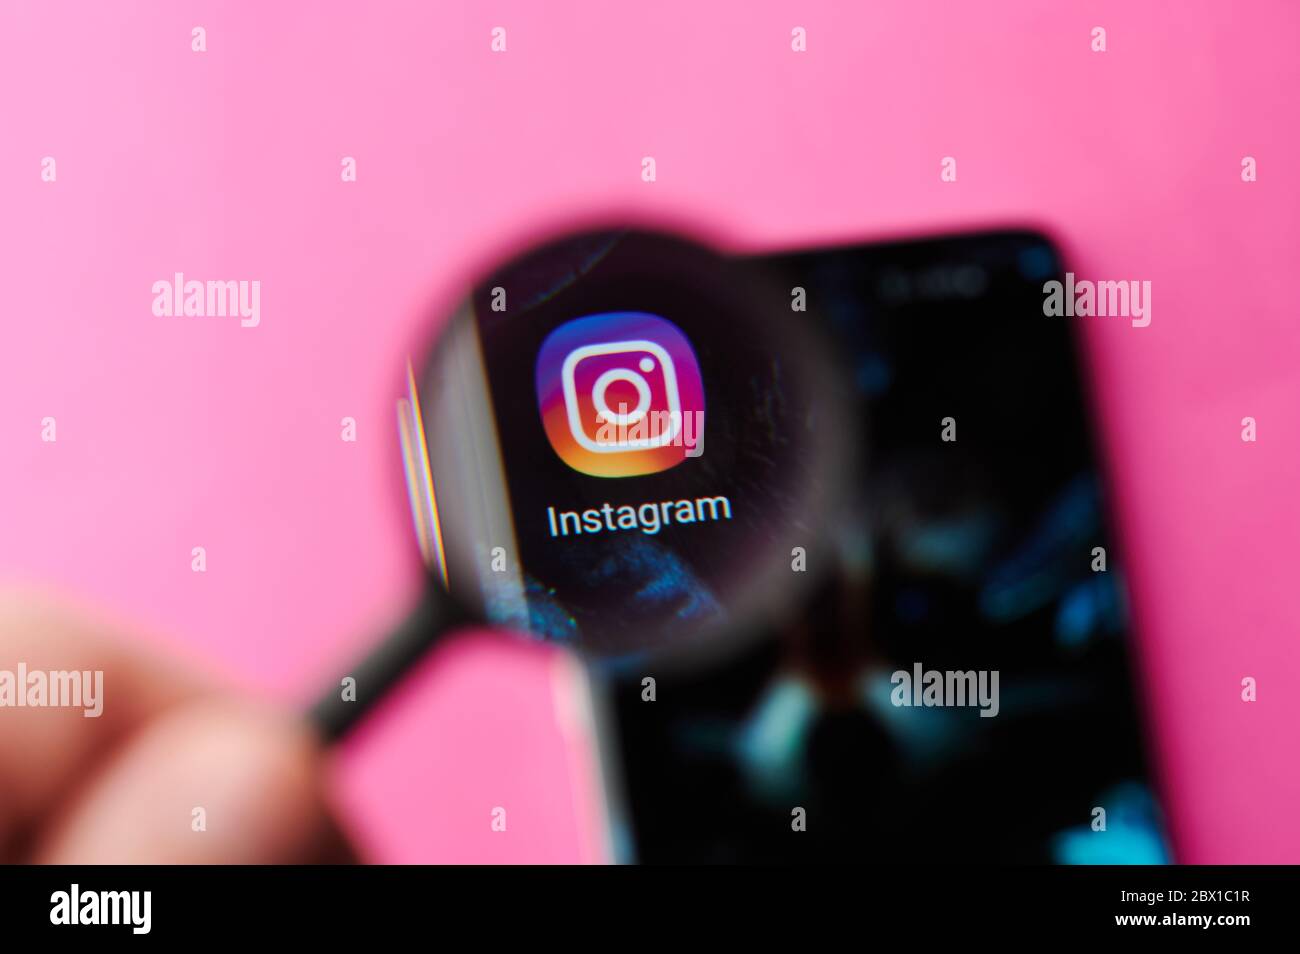 New-York , USA - June 4 , 2020: Browsing Instagram app on modern smartphone throw magnifier close up view Stock Photo